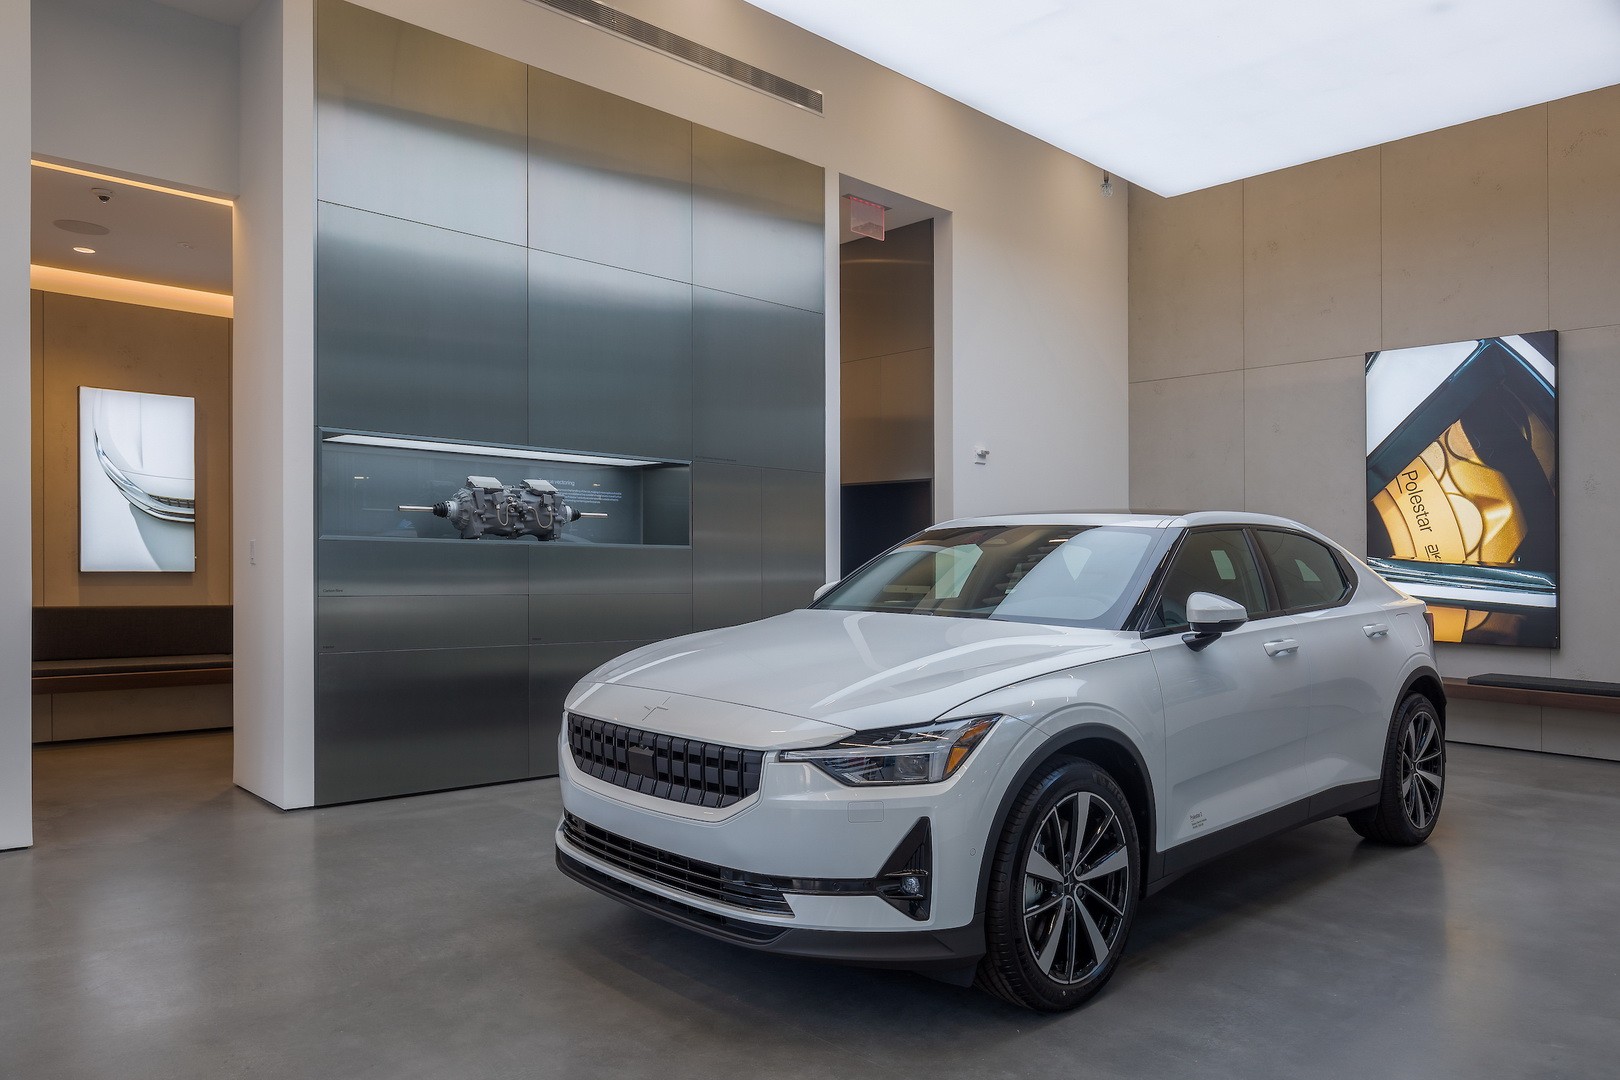 Say “ No Compromise” to the Super Bowl? Only Polestar!